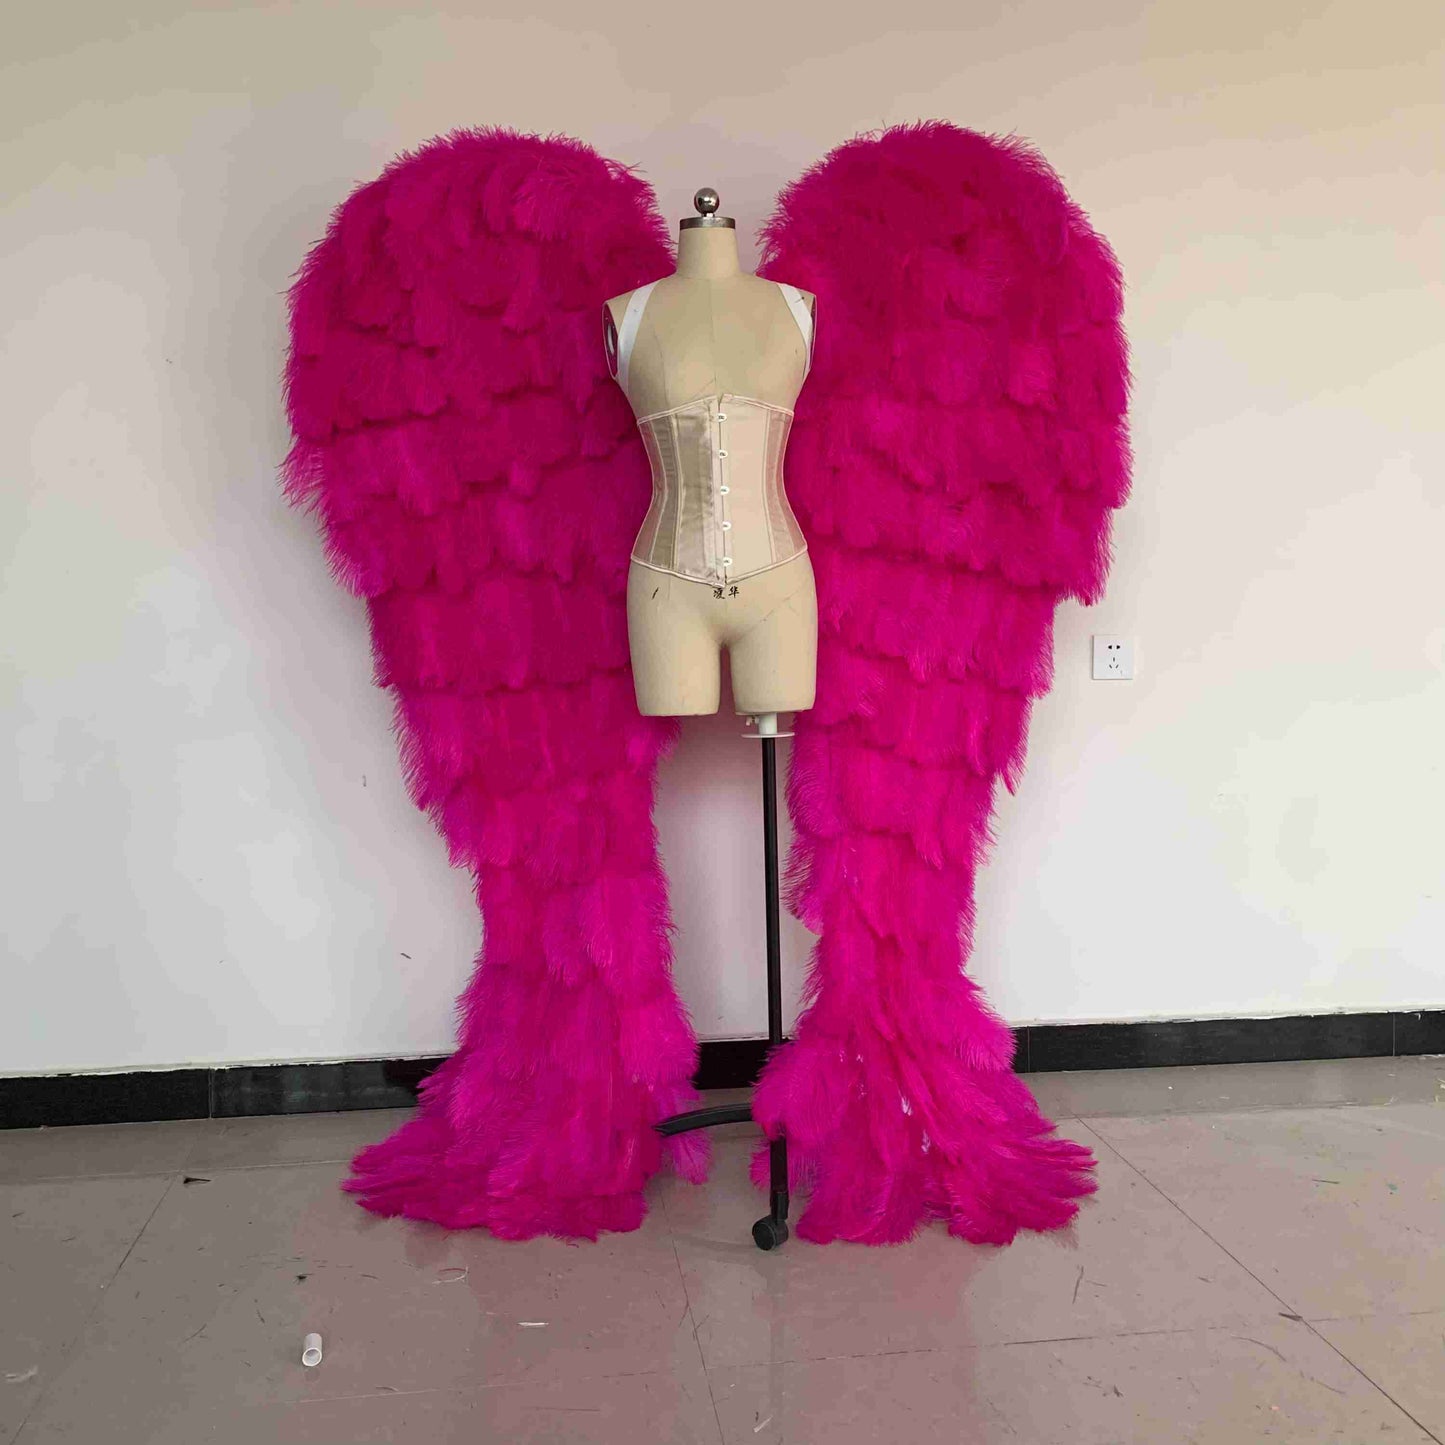 Our luxury dark pink angel wings from the front. Made from ostrich feathers. Wings for angel costume. Suitable for photoshoots especially for boudoirs.